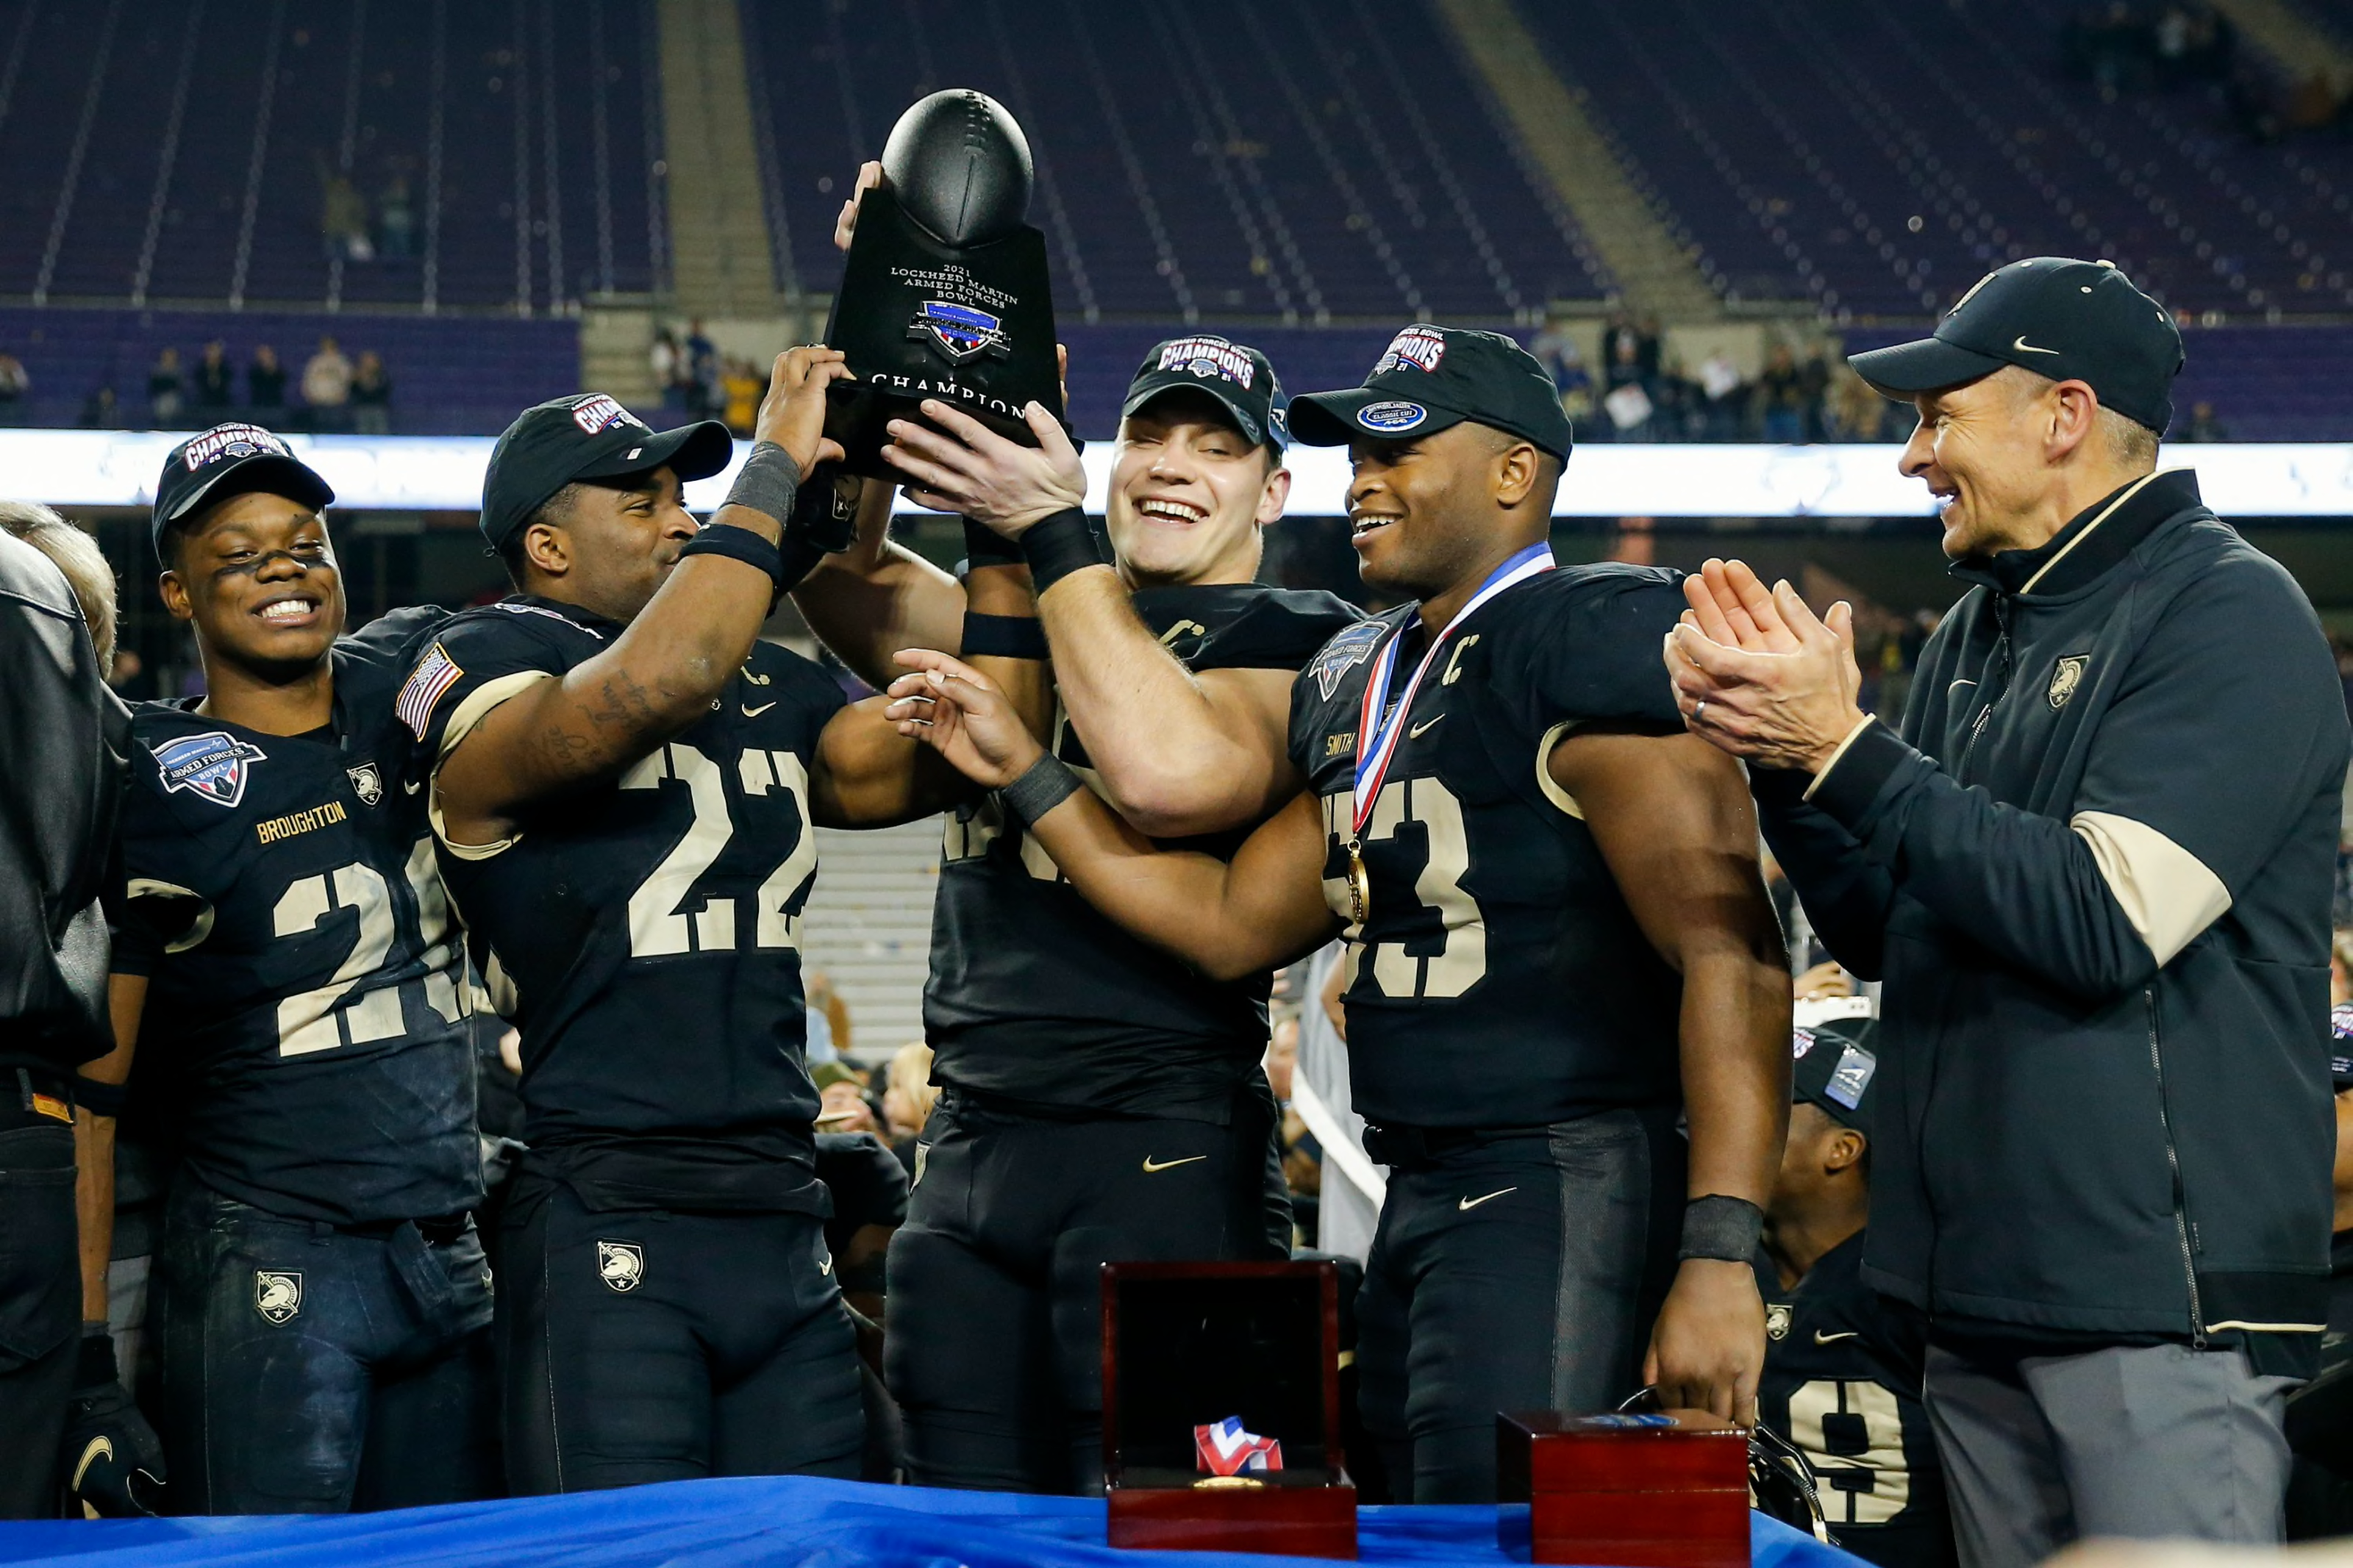 Army Football: 2022 Black Knights season preview and prediction - Page 4